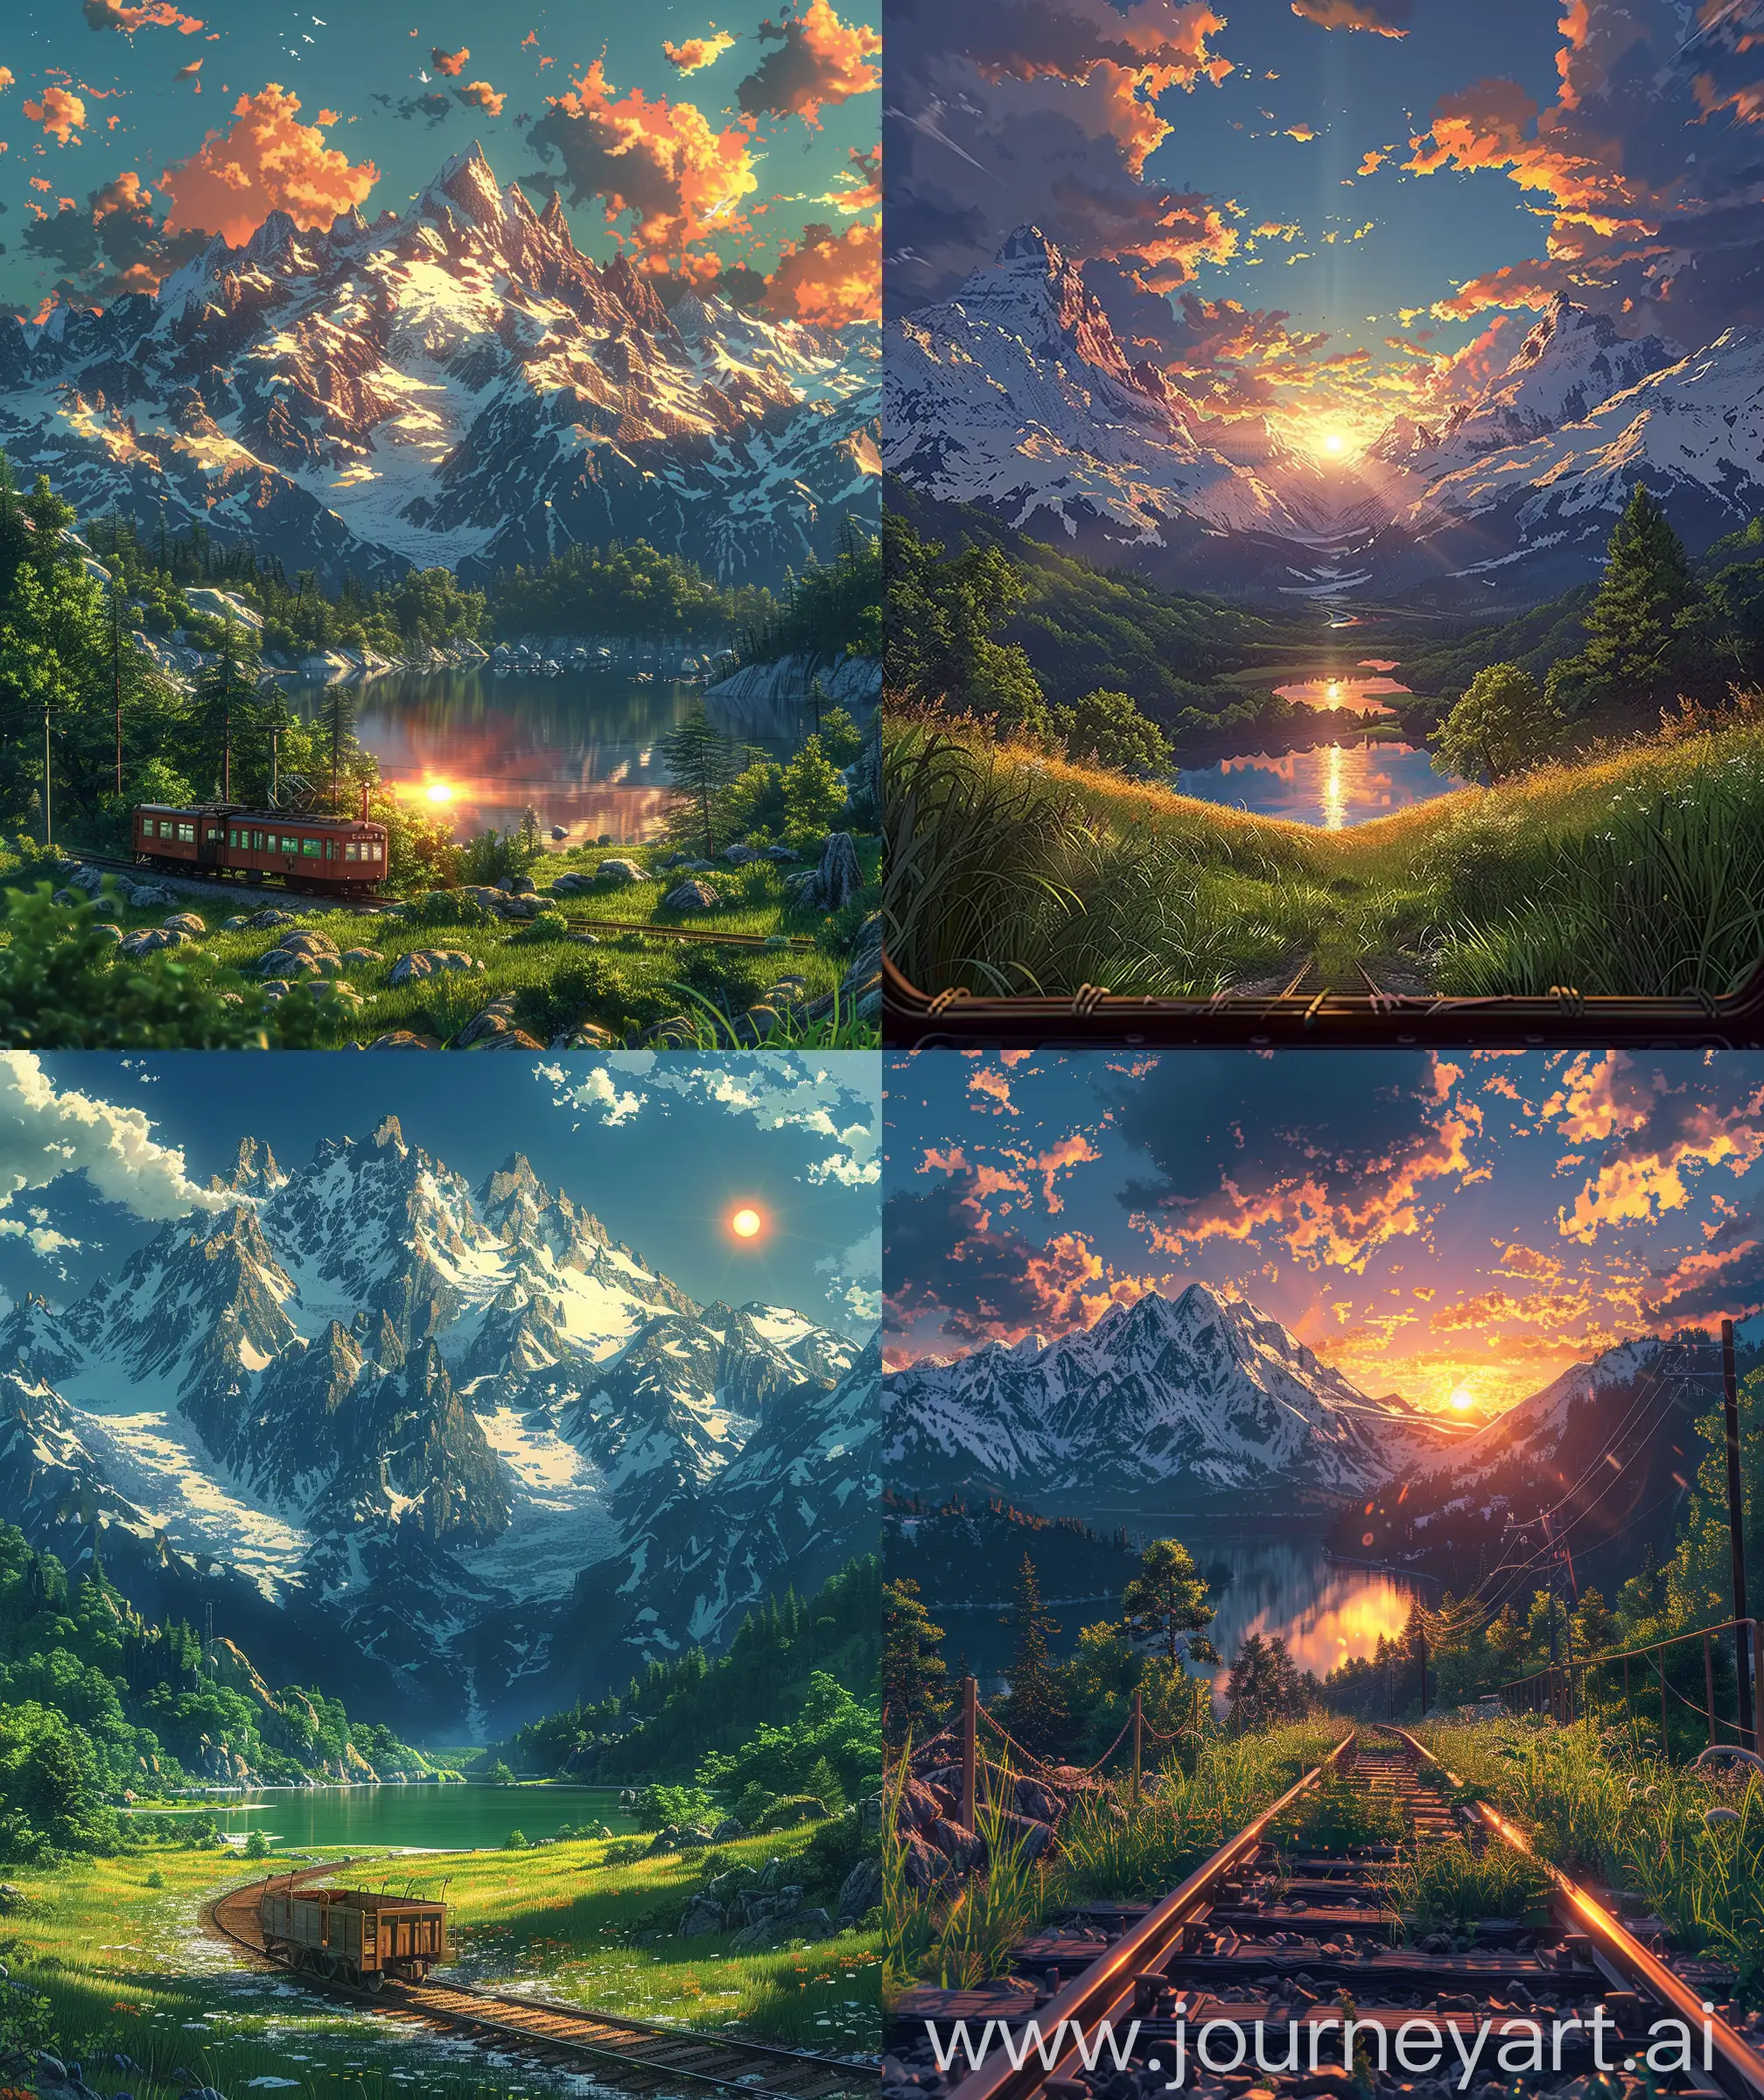 Anime scenary, dawn time, illustration,view from train, little bit train cart showing , snowy mountains, lakes, spring touch, serenity, cool tone, illustration, sun, beautiful scenary, Ultra hd, grassland, anine scenary, mokoto shinkai style, no blurry image, no hyperrealistic --ar 27:32 --s 400